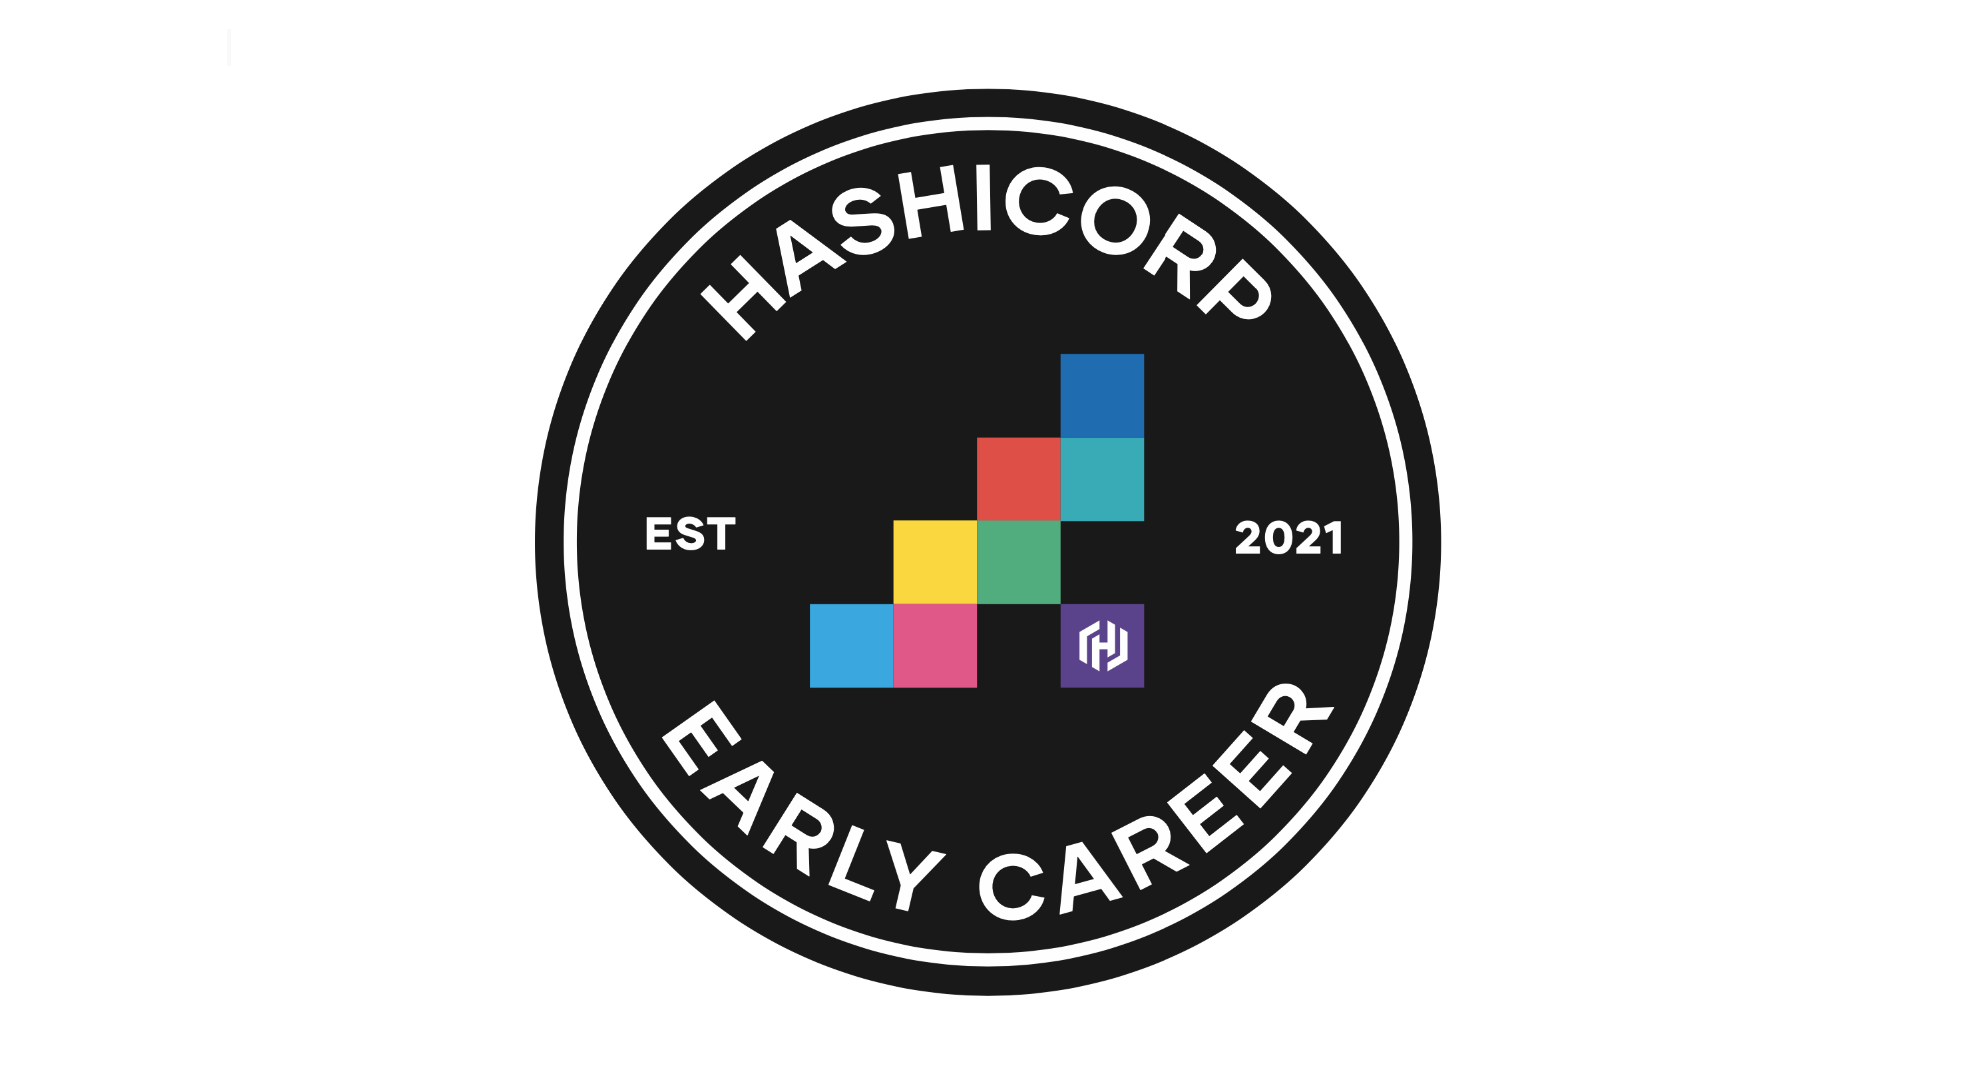 Recruiting for Early Careers at HashiCorp